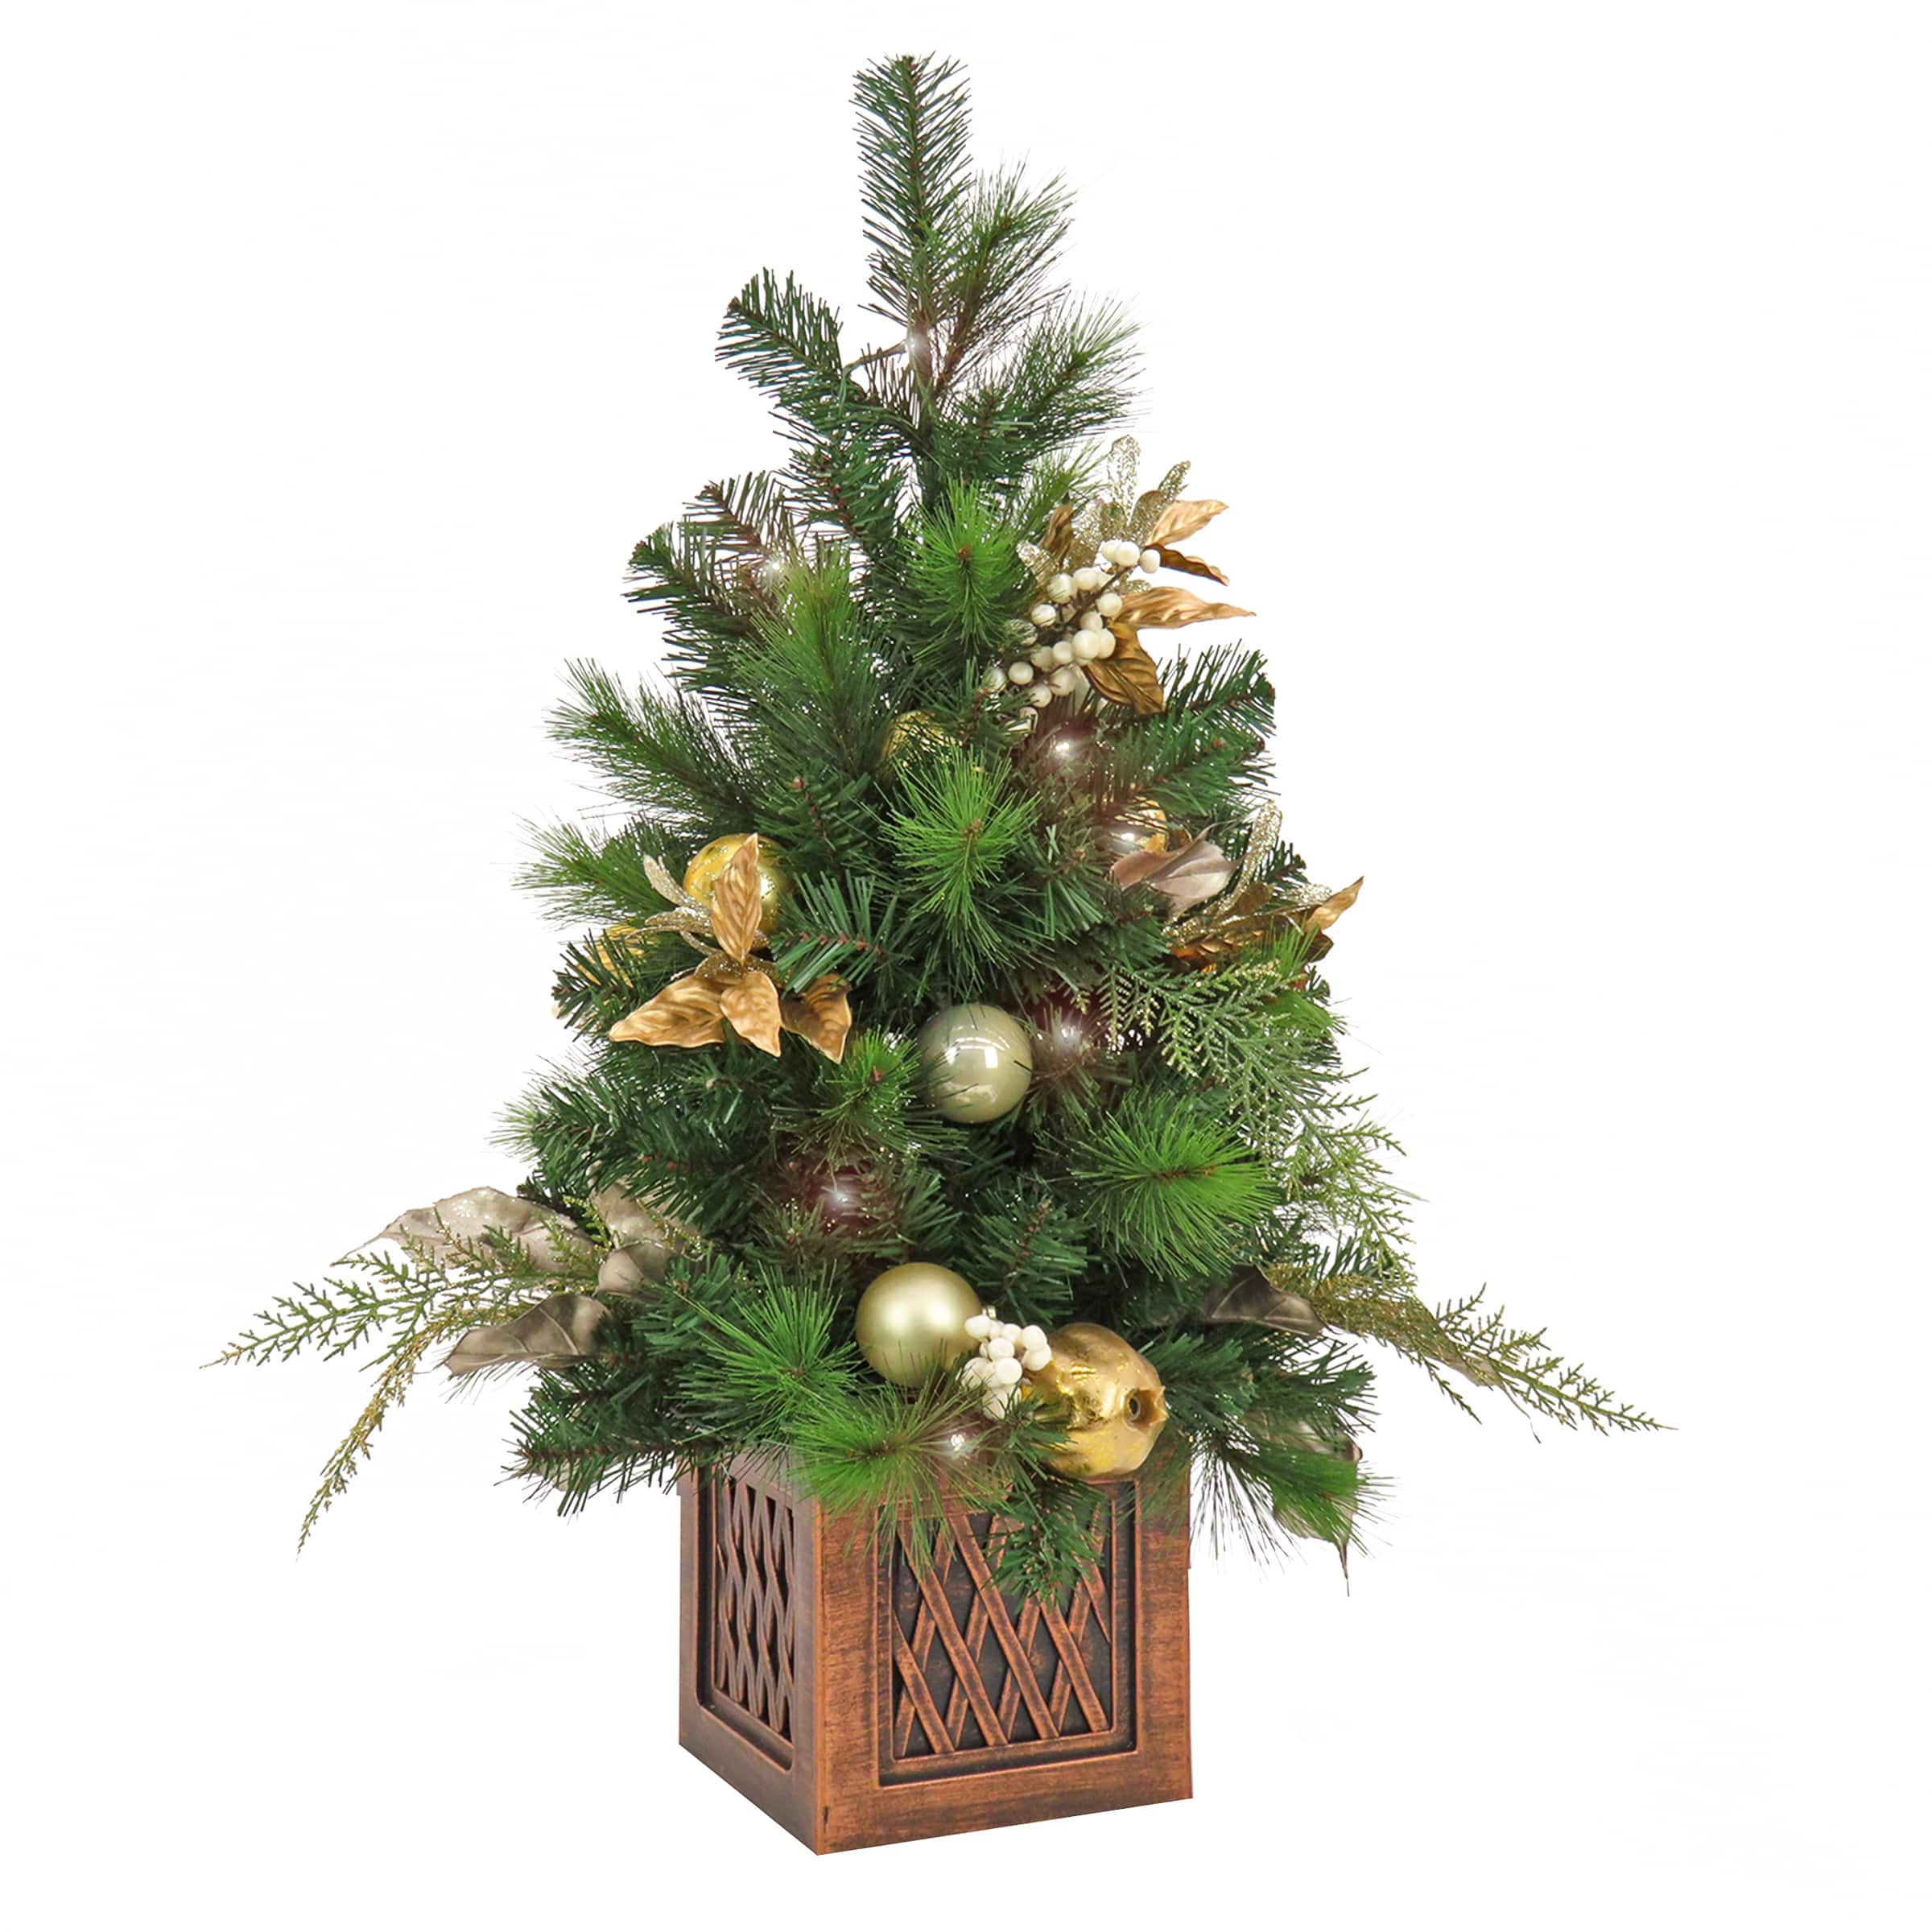 3ft. Pre-Lit Yuletide Glam Artificial Christmas Tree in Lattice Planter, Warm White LED Lights